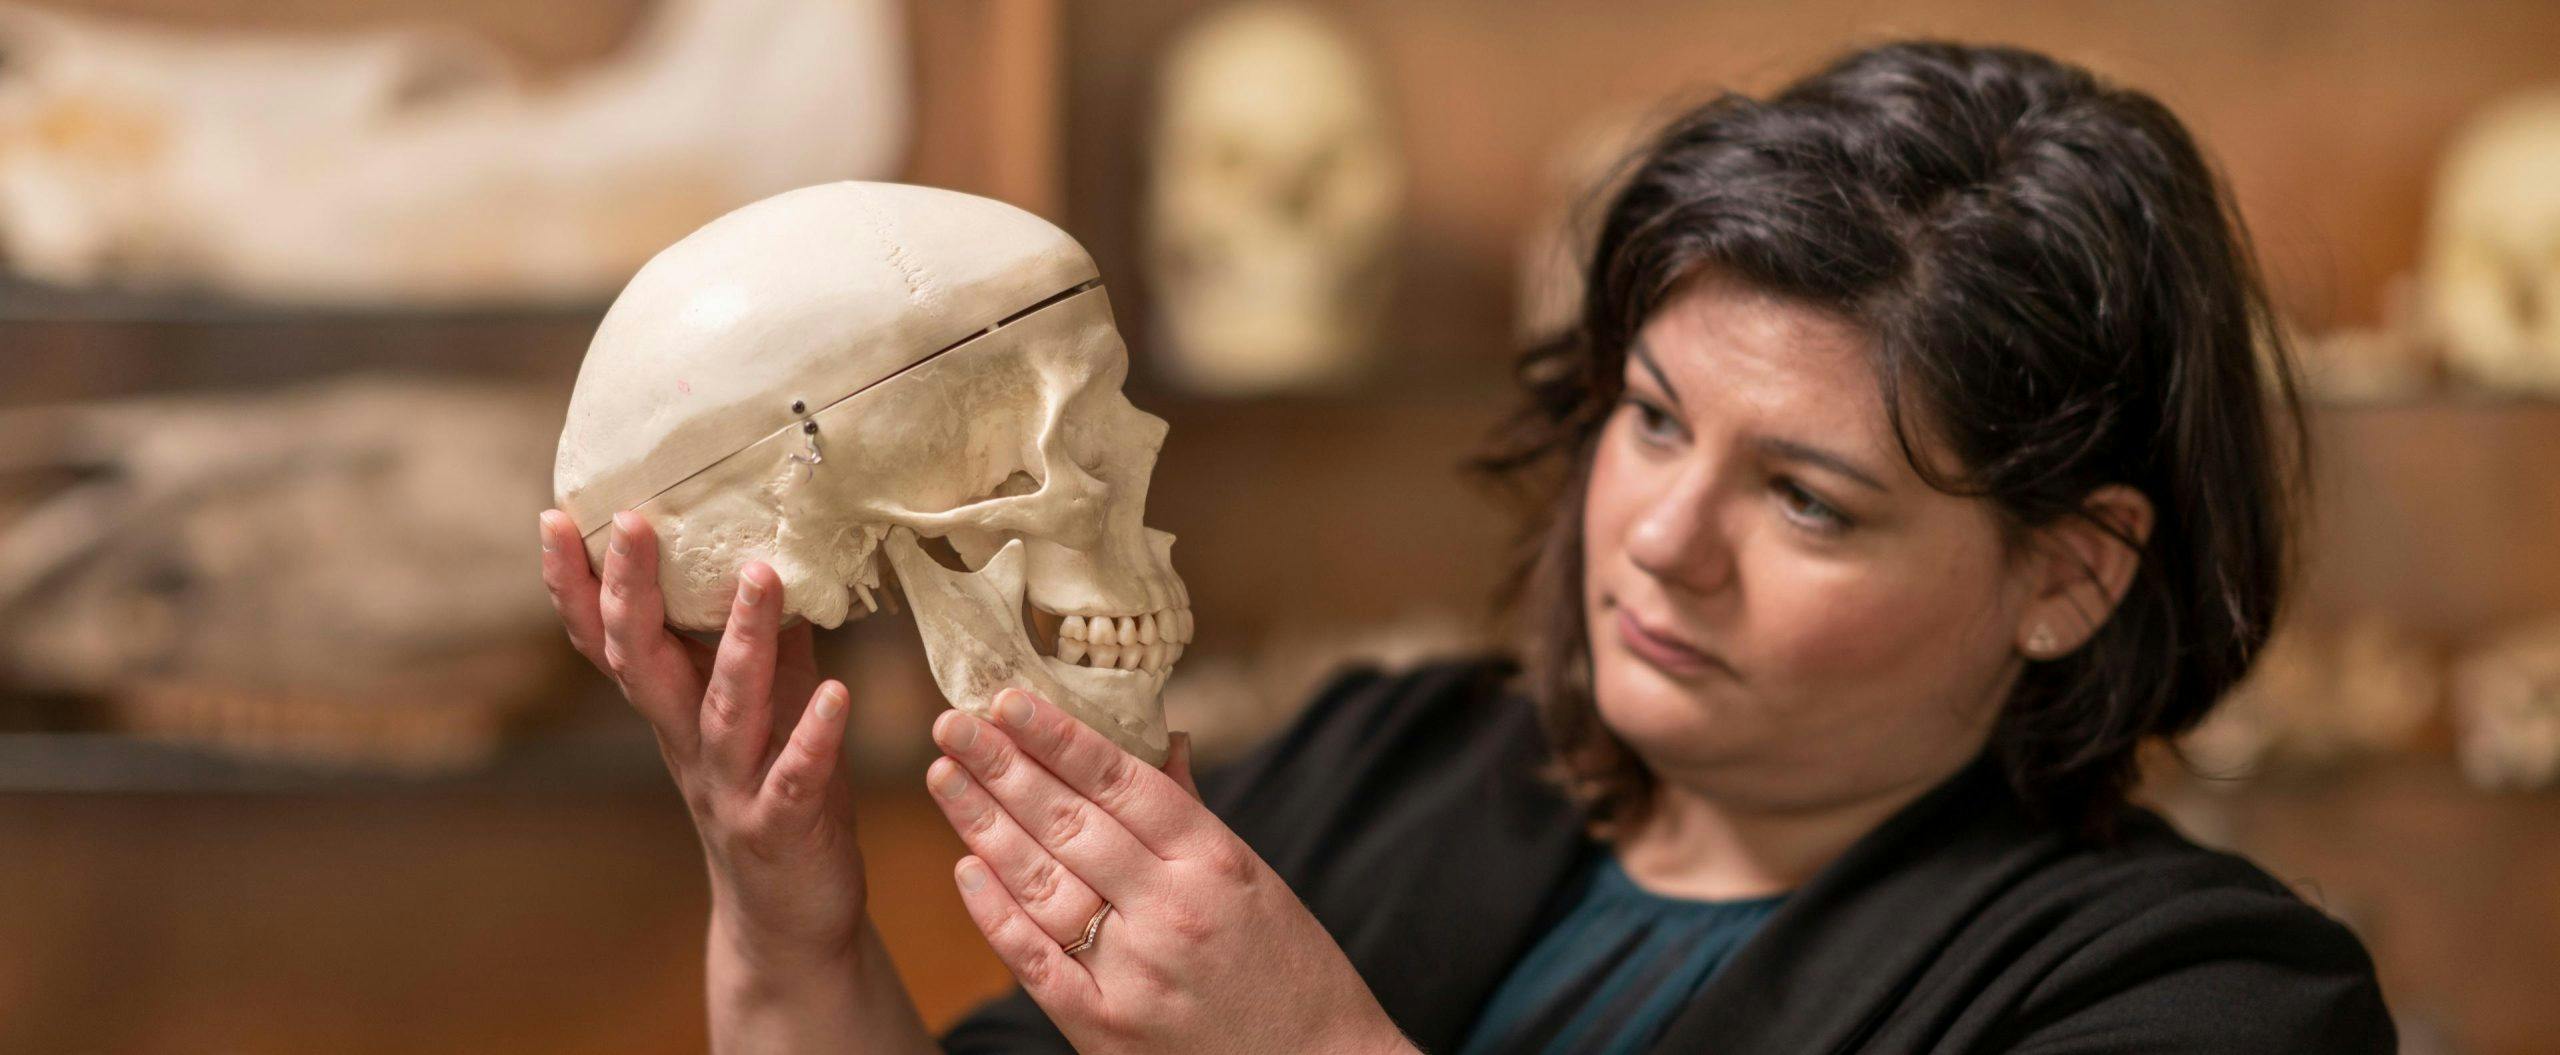 Stacey Ward looks closely at a model of a human skull she is holding in her hands.